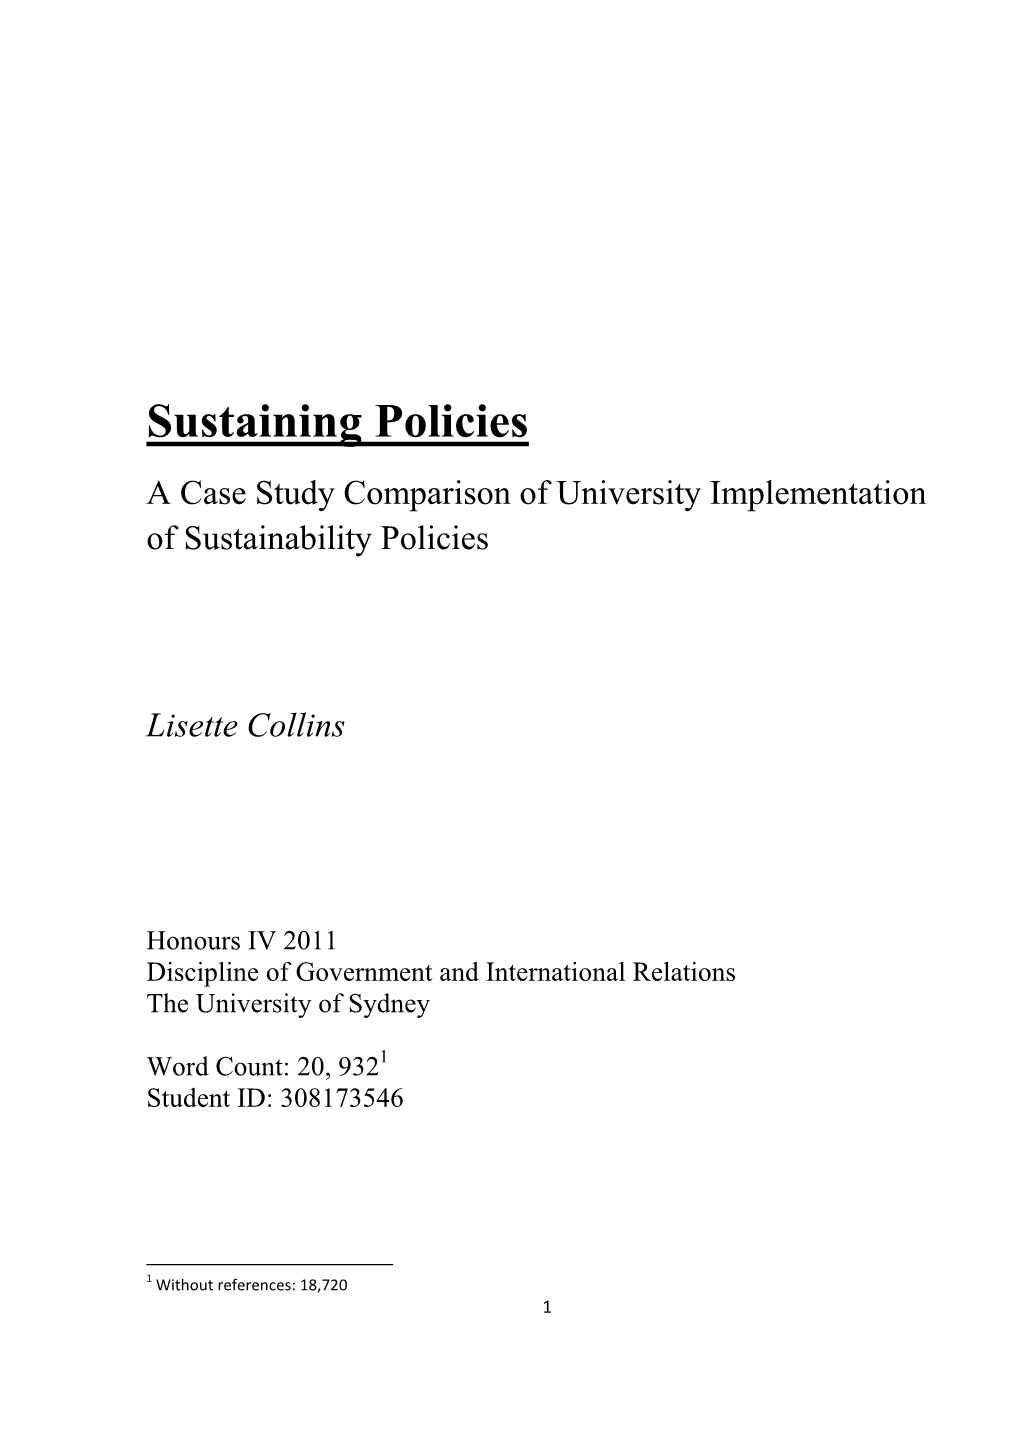 Sustaining Policies a Case Study Comparison of University Implementation of Sustainability Policies